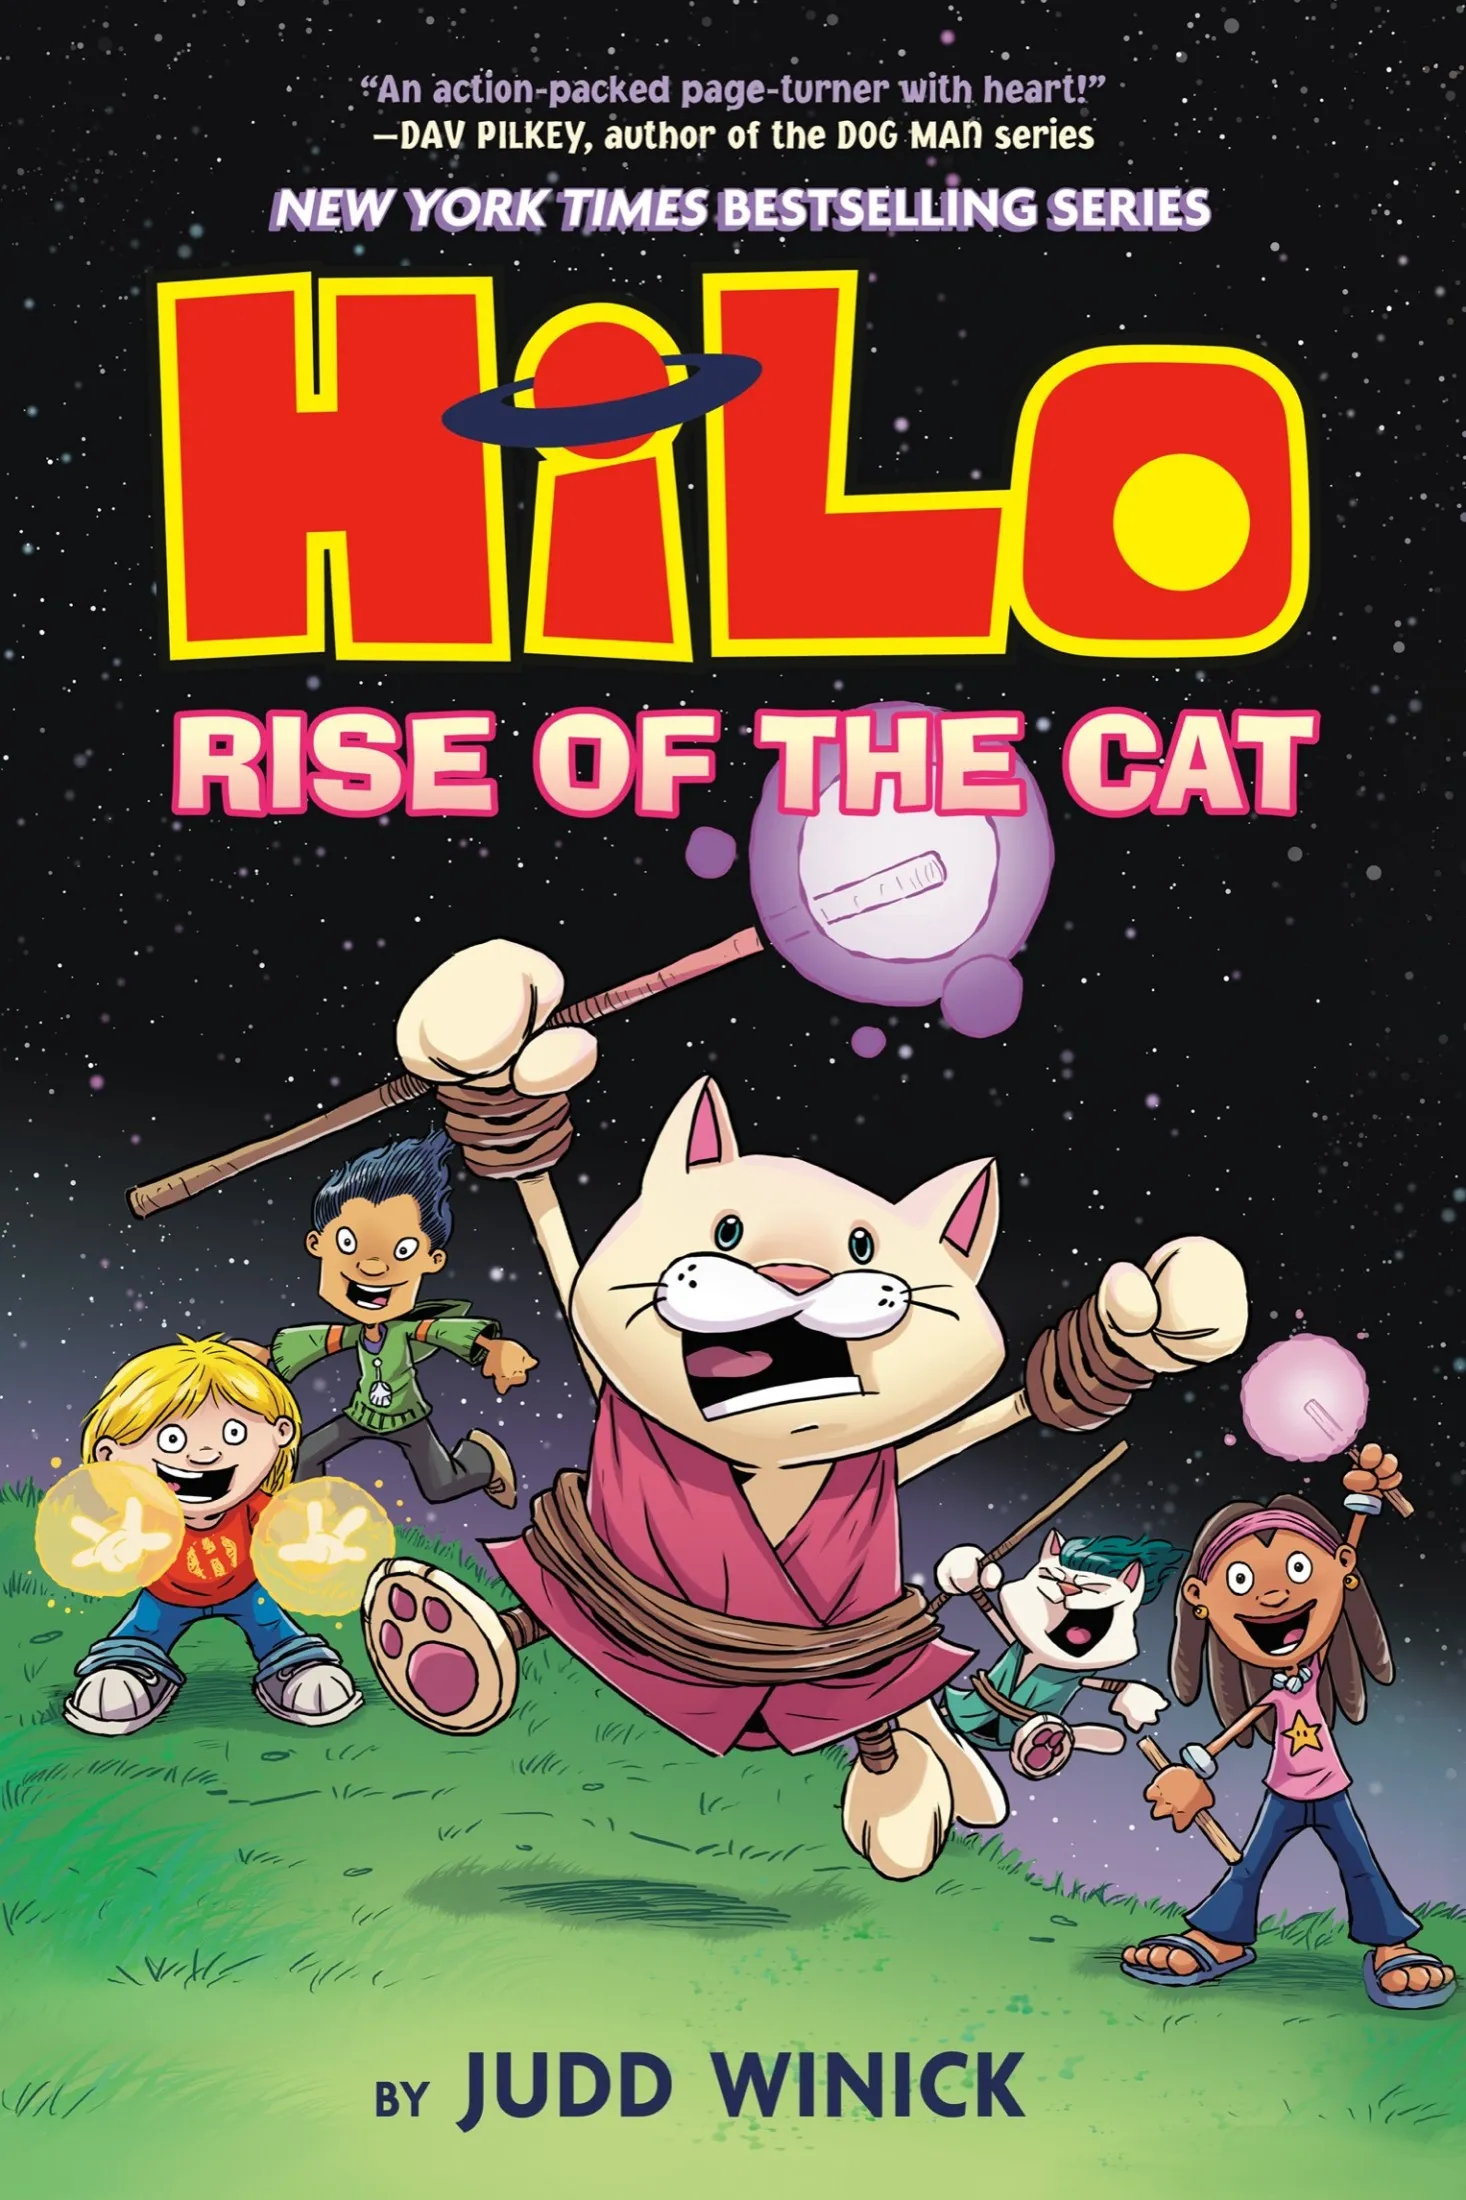 Rise of the Cat (Hilo #10)